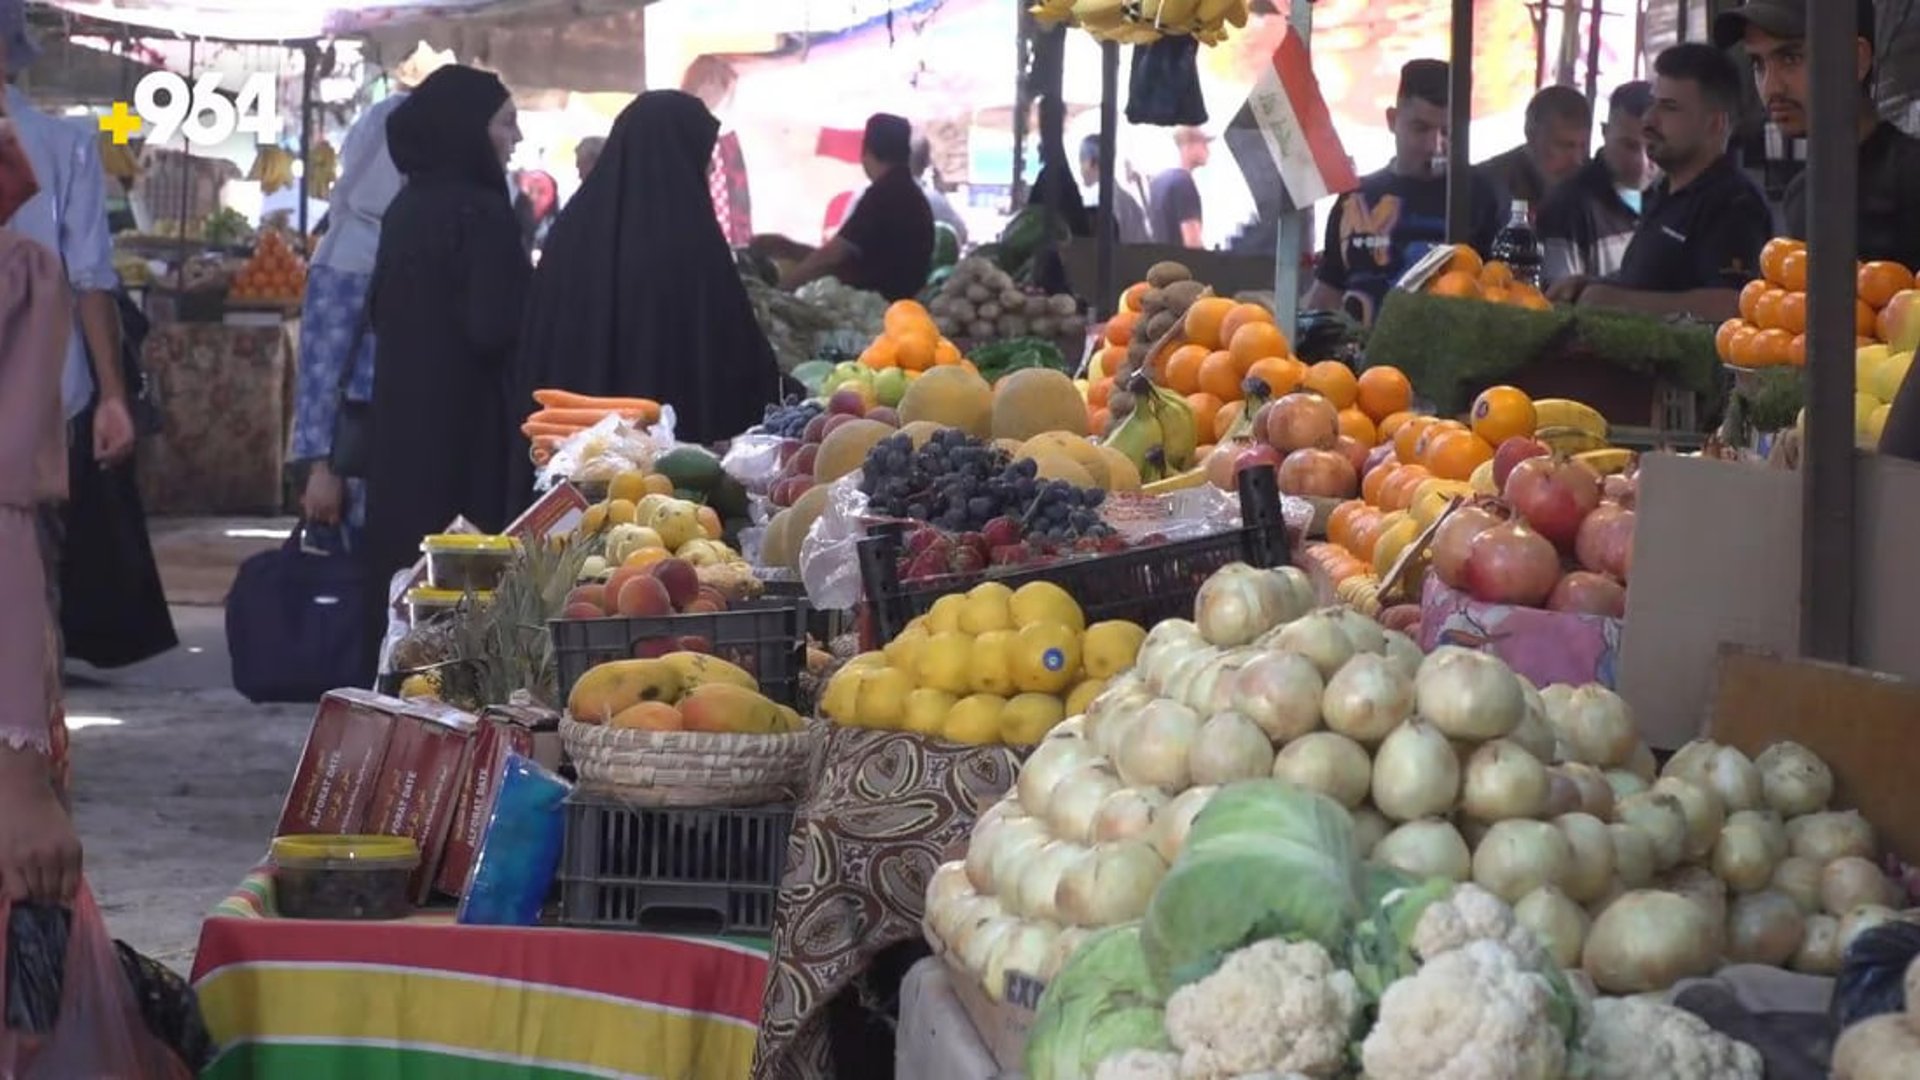 Prices in Hillas markets stabilize after conclusion of Arbaeen pilgrimage